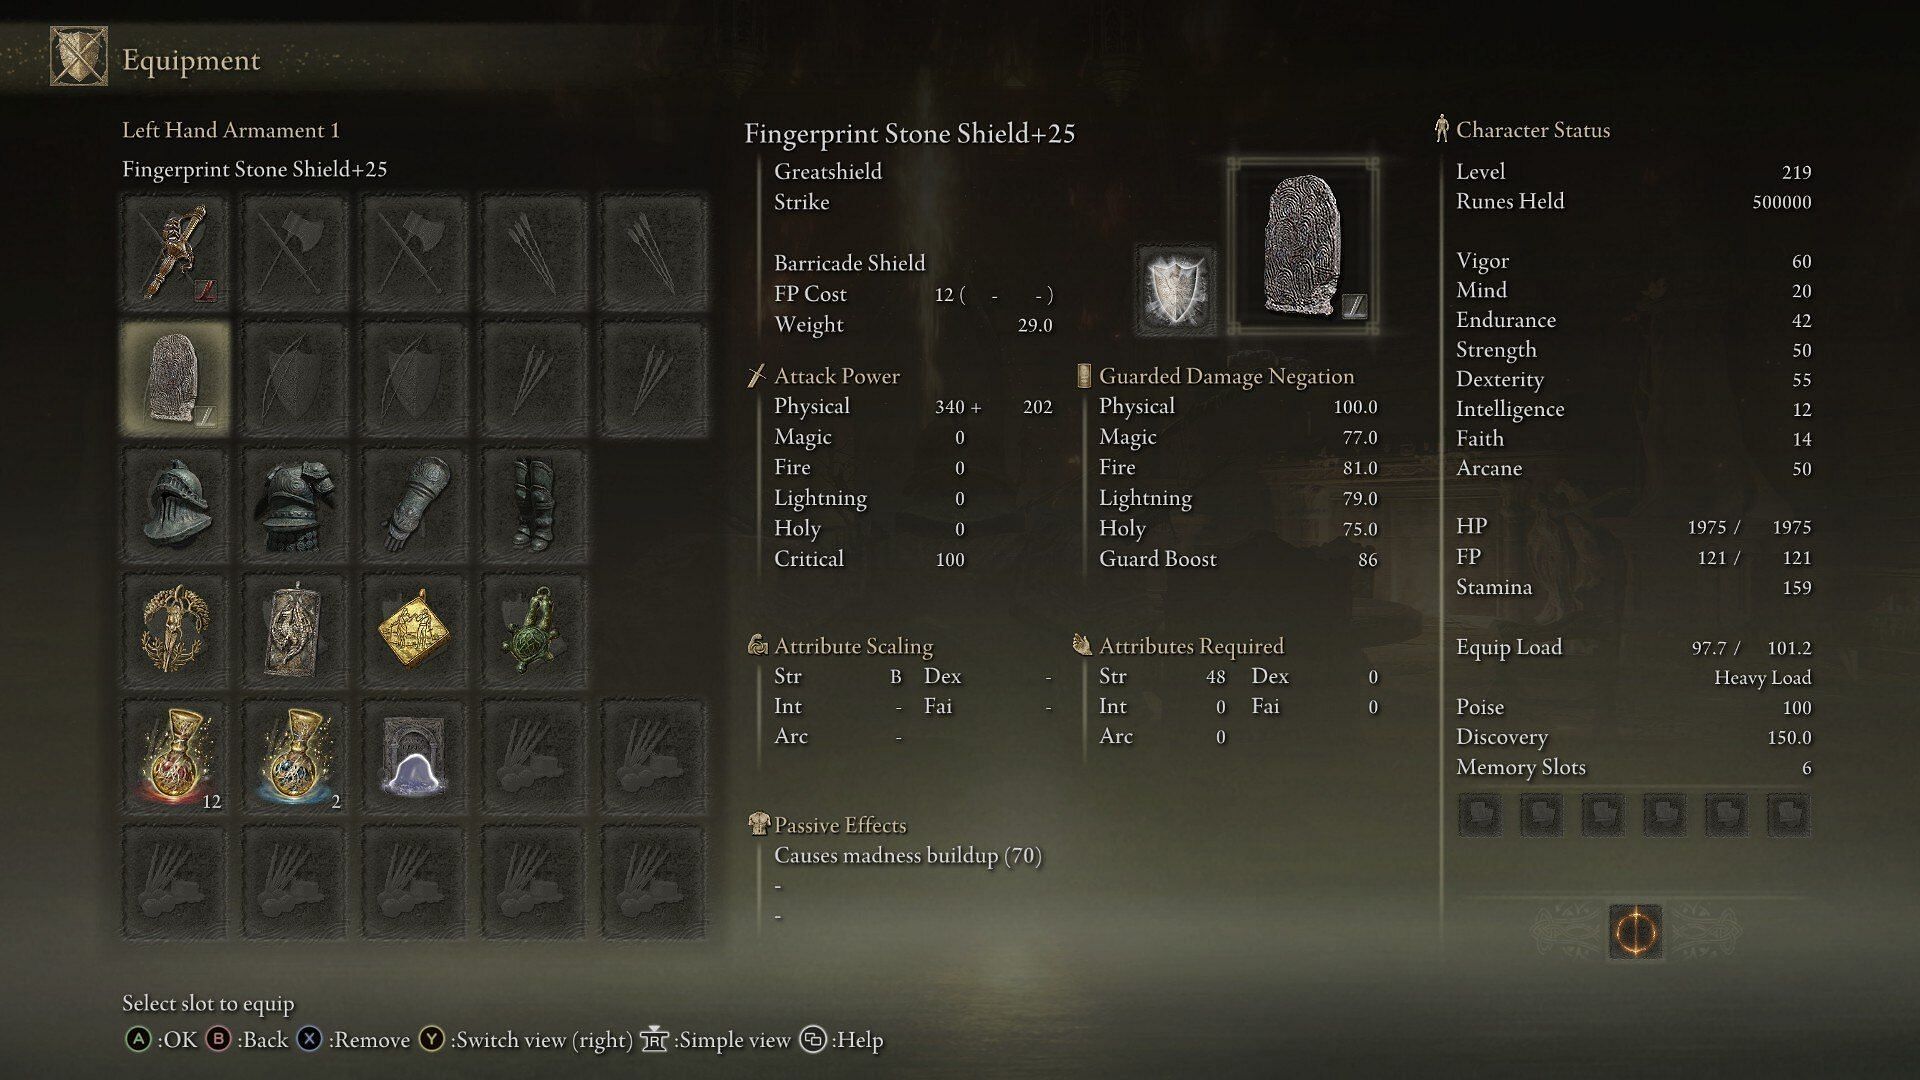 The Fingerprint Stone Sheild +25 is an important element of this build (Image via FromSoftware)